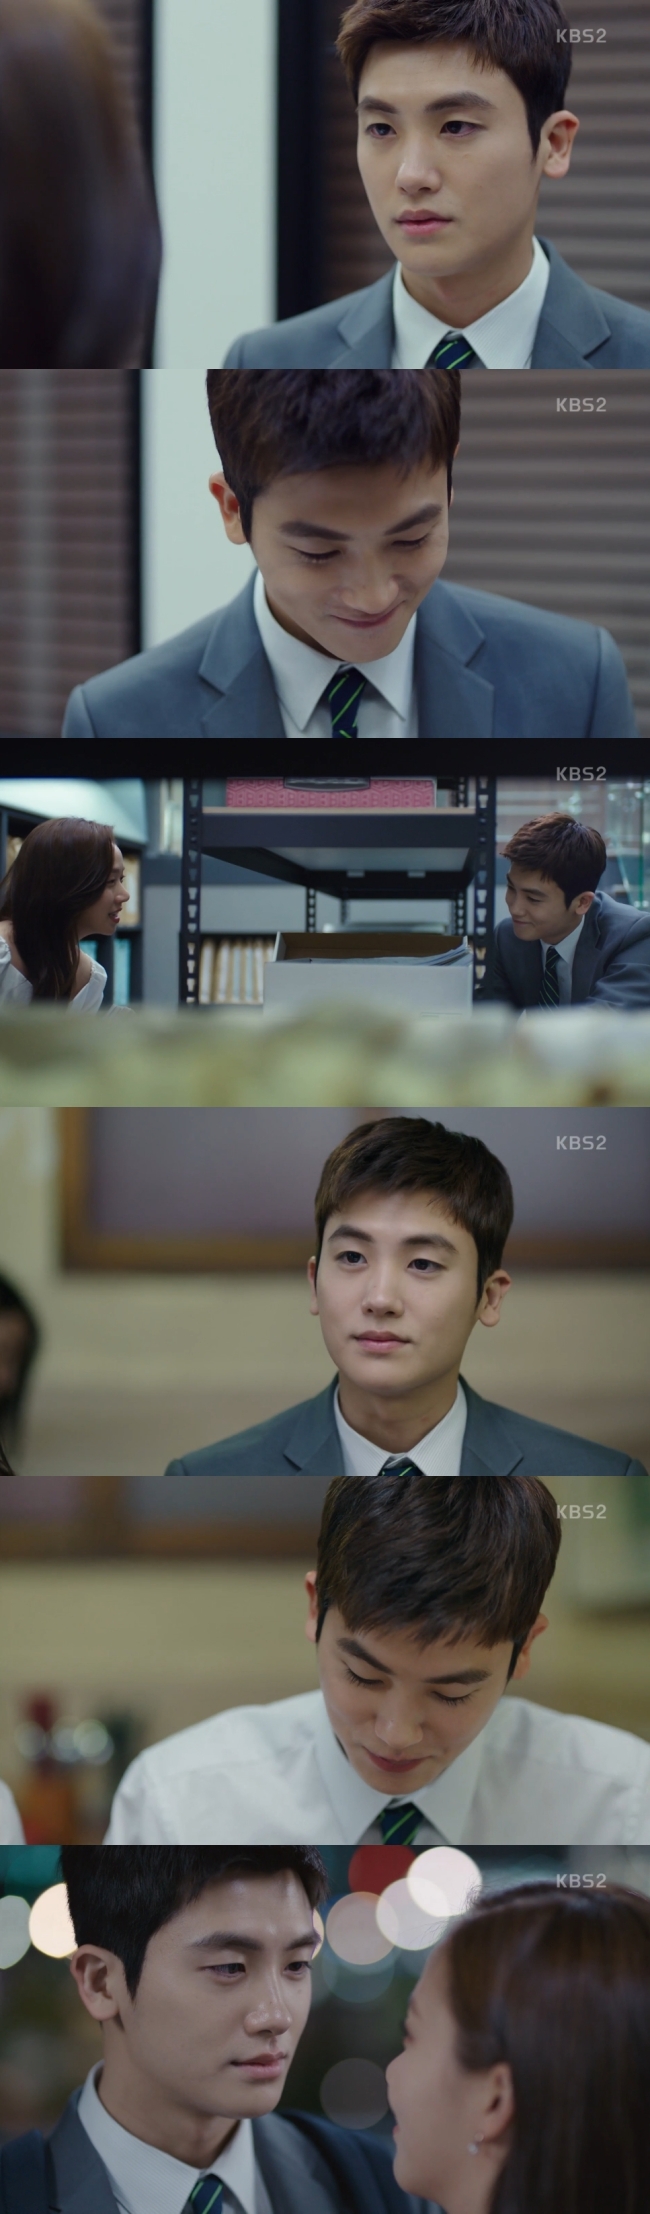 Suits Park Hyung-sik is a cute man when he loves.A man with a genius matching king who never forgets when he sees and understands it.He is a brain-sexy man who memorizes a whole book that is difficult to read and knows all the records of a few years ago.The house theater girls heart is bound to shake: It is the story of Park Hyung-sik (played by Ko Yeon-woo) in KBS 2TVs tree drama Suits.Park Hyung-sik is facing viewers in Suits as a genius matching king, a fake new lawyer with empathy.In the play, Ko Yeon-woo is a person who needs to show his own growth story as well as his romance with Choi Kang-seok (Jang Dong-gun).Park Hyung-sik shows his unique character expression ability and draws his own color with his own color and Suits.In the 13th episode of Suits, which was broadcast on the 6th, the special charm of the character of the late actress was remarkable in the expression of Park Hyung-sik, which sensibly captures it.At the center was the keyword Love, a radical romance of a rabbit couple who showed a thrilling kiss on the last broadcast.On this day, Ko Yeon-woo approached Ji-na Kim (Go Sung-hee) with apologetic regret that she failed to keep her dinner promise, such as hovering around her side, or talking to her constantly.I just started to love, but the cuteness of a man who is still in love is outstanding.In addition, Ji-na Kim and her grandmother, or even the proposal, but the scene of the ring was not enough to add to the pinkish excitement of the house theater.The decisive reason why the house theater cheers on Ko Yeon-woos love is because it shows a reversal from the existing character called Genius.It is a poor and awkward appearance in front of love, with a perfect memory of anything, excellent situation judgment and coping ability.It is a special charm of the character of Ko Yeon-woo to answer Yes honestly even though it seems to jump to the question whether he has not been in love.Above all, the expression of actor Park Hyung-sik, who perfectly captures the lovely charm of this kind of actor, can not be missed.Park Hyung-sik conveys all the true heart, excitement, throbbing, and affection with one eye depending on the situation.Here, we show the change of the character flexibly depending on who the opponent is.In fact, everyone will react slightly differently to each other, but it is not easy to express them in characters because they need sensual and detailed acting.But hes a man who changes more in love. Hes got to steal the audience. Park Hyung-sik, who thought he was just a romance.Because of Park Hyung-sik, viewers will also wait for Suits in front of TV.